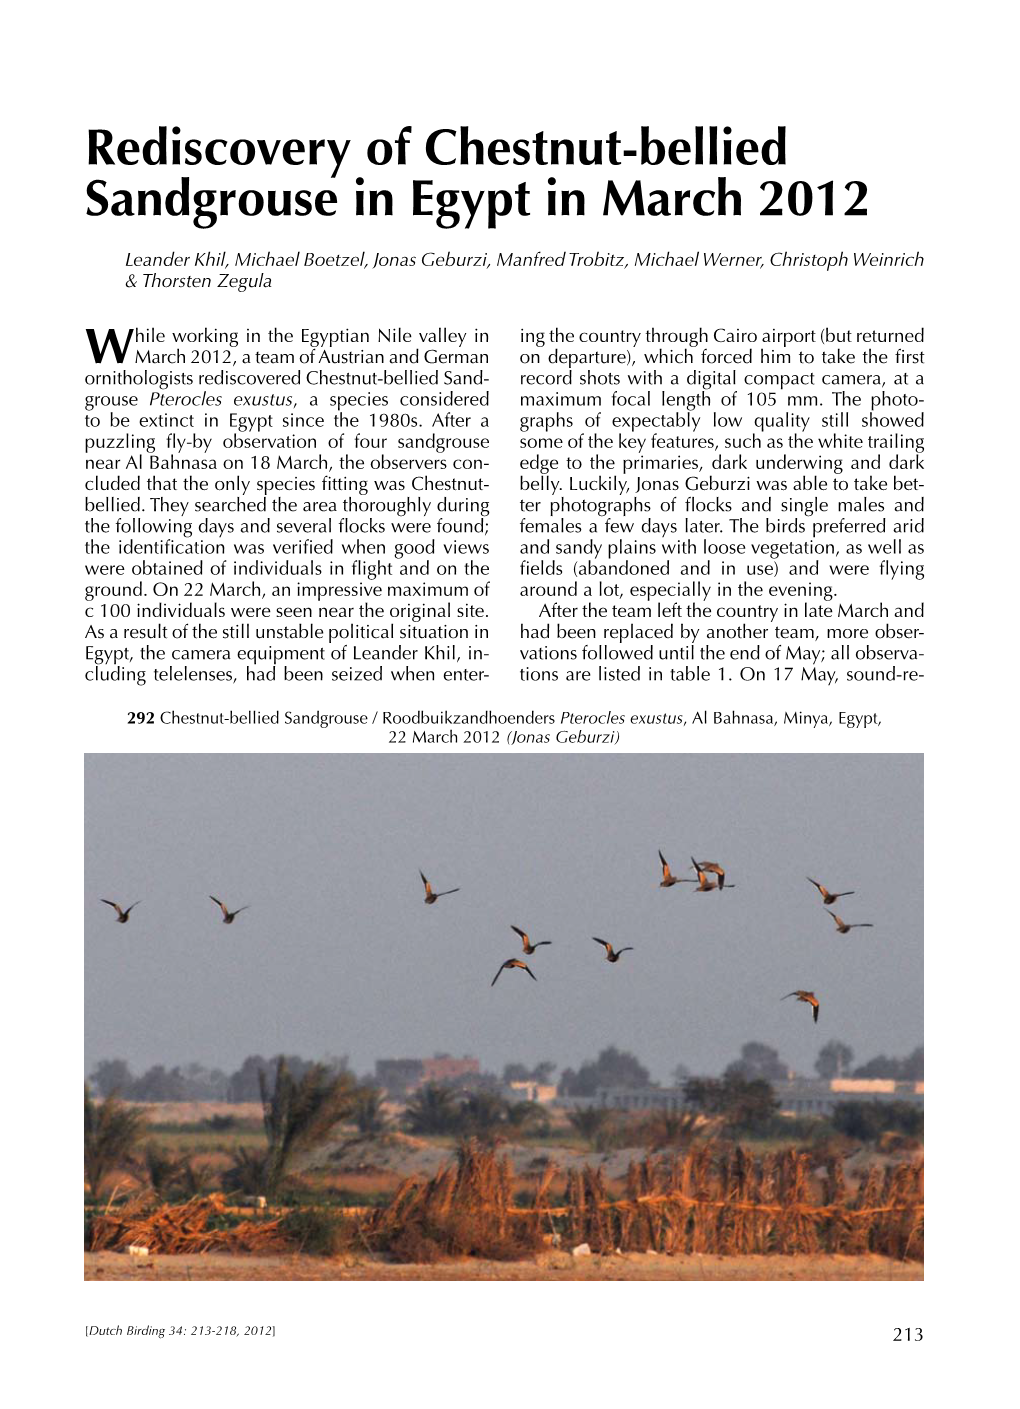 Rediscovery of Chestnut-Bellied Sandgrouse in Egypt in March 2012